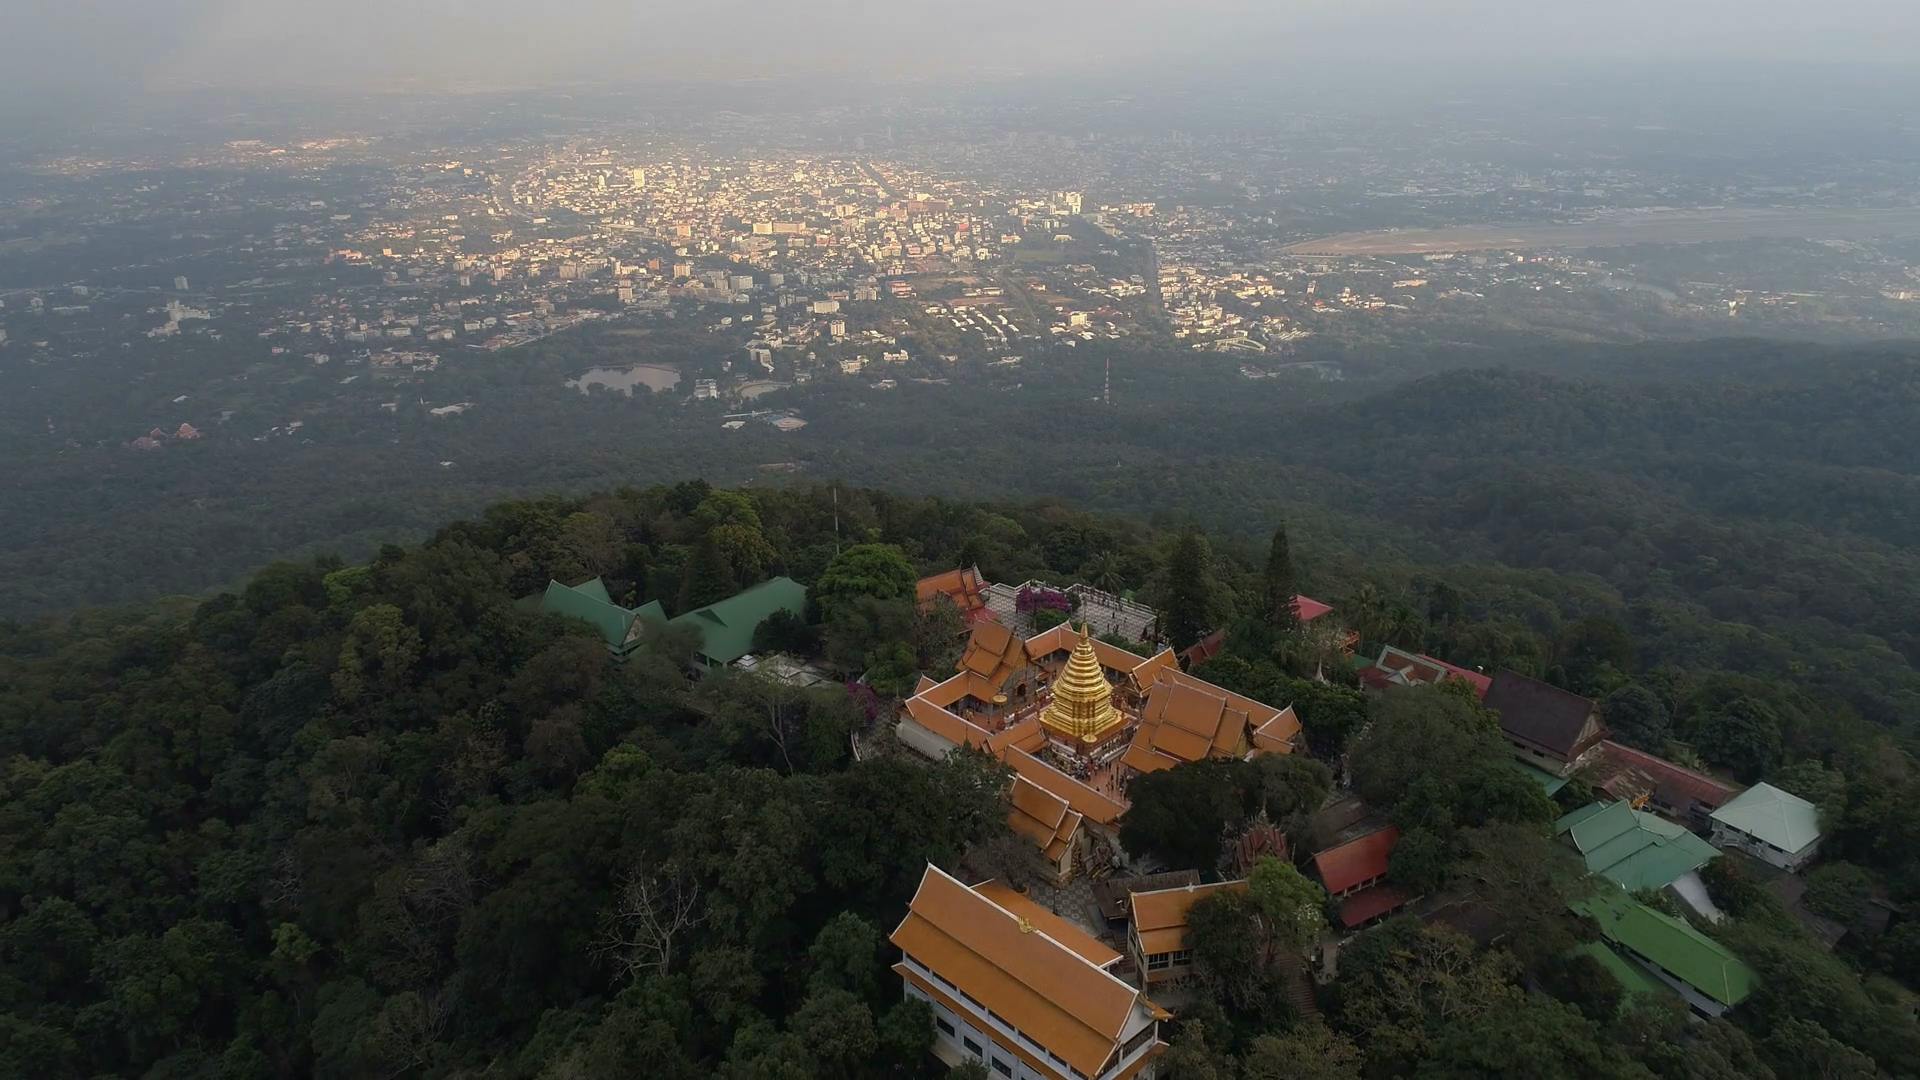 videoblocks-aerial-scene-of-zoom-out-from-temple-on-the-mountain-doi-suthep-chiang-mai-chaing-mai-thailand-4k-video_r3ml5-so7m_thumbnail-full01.png